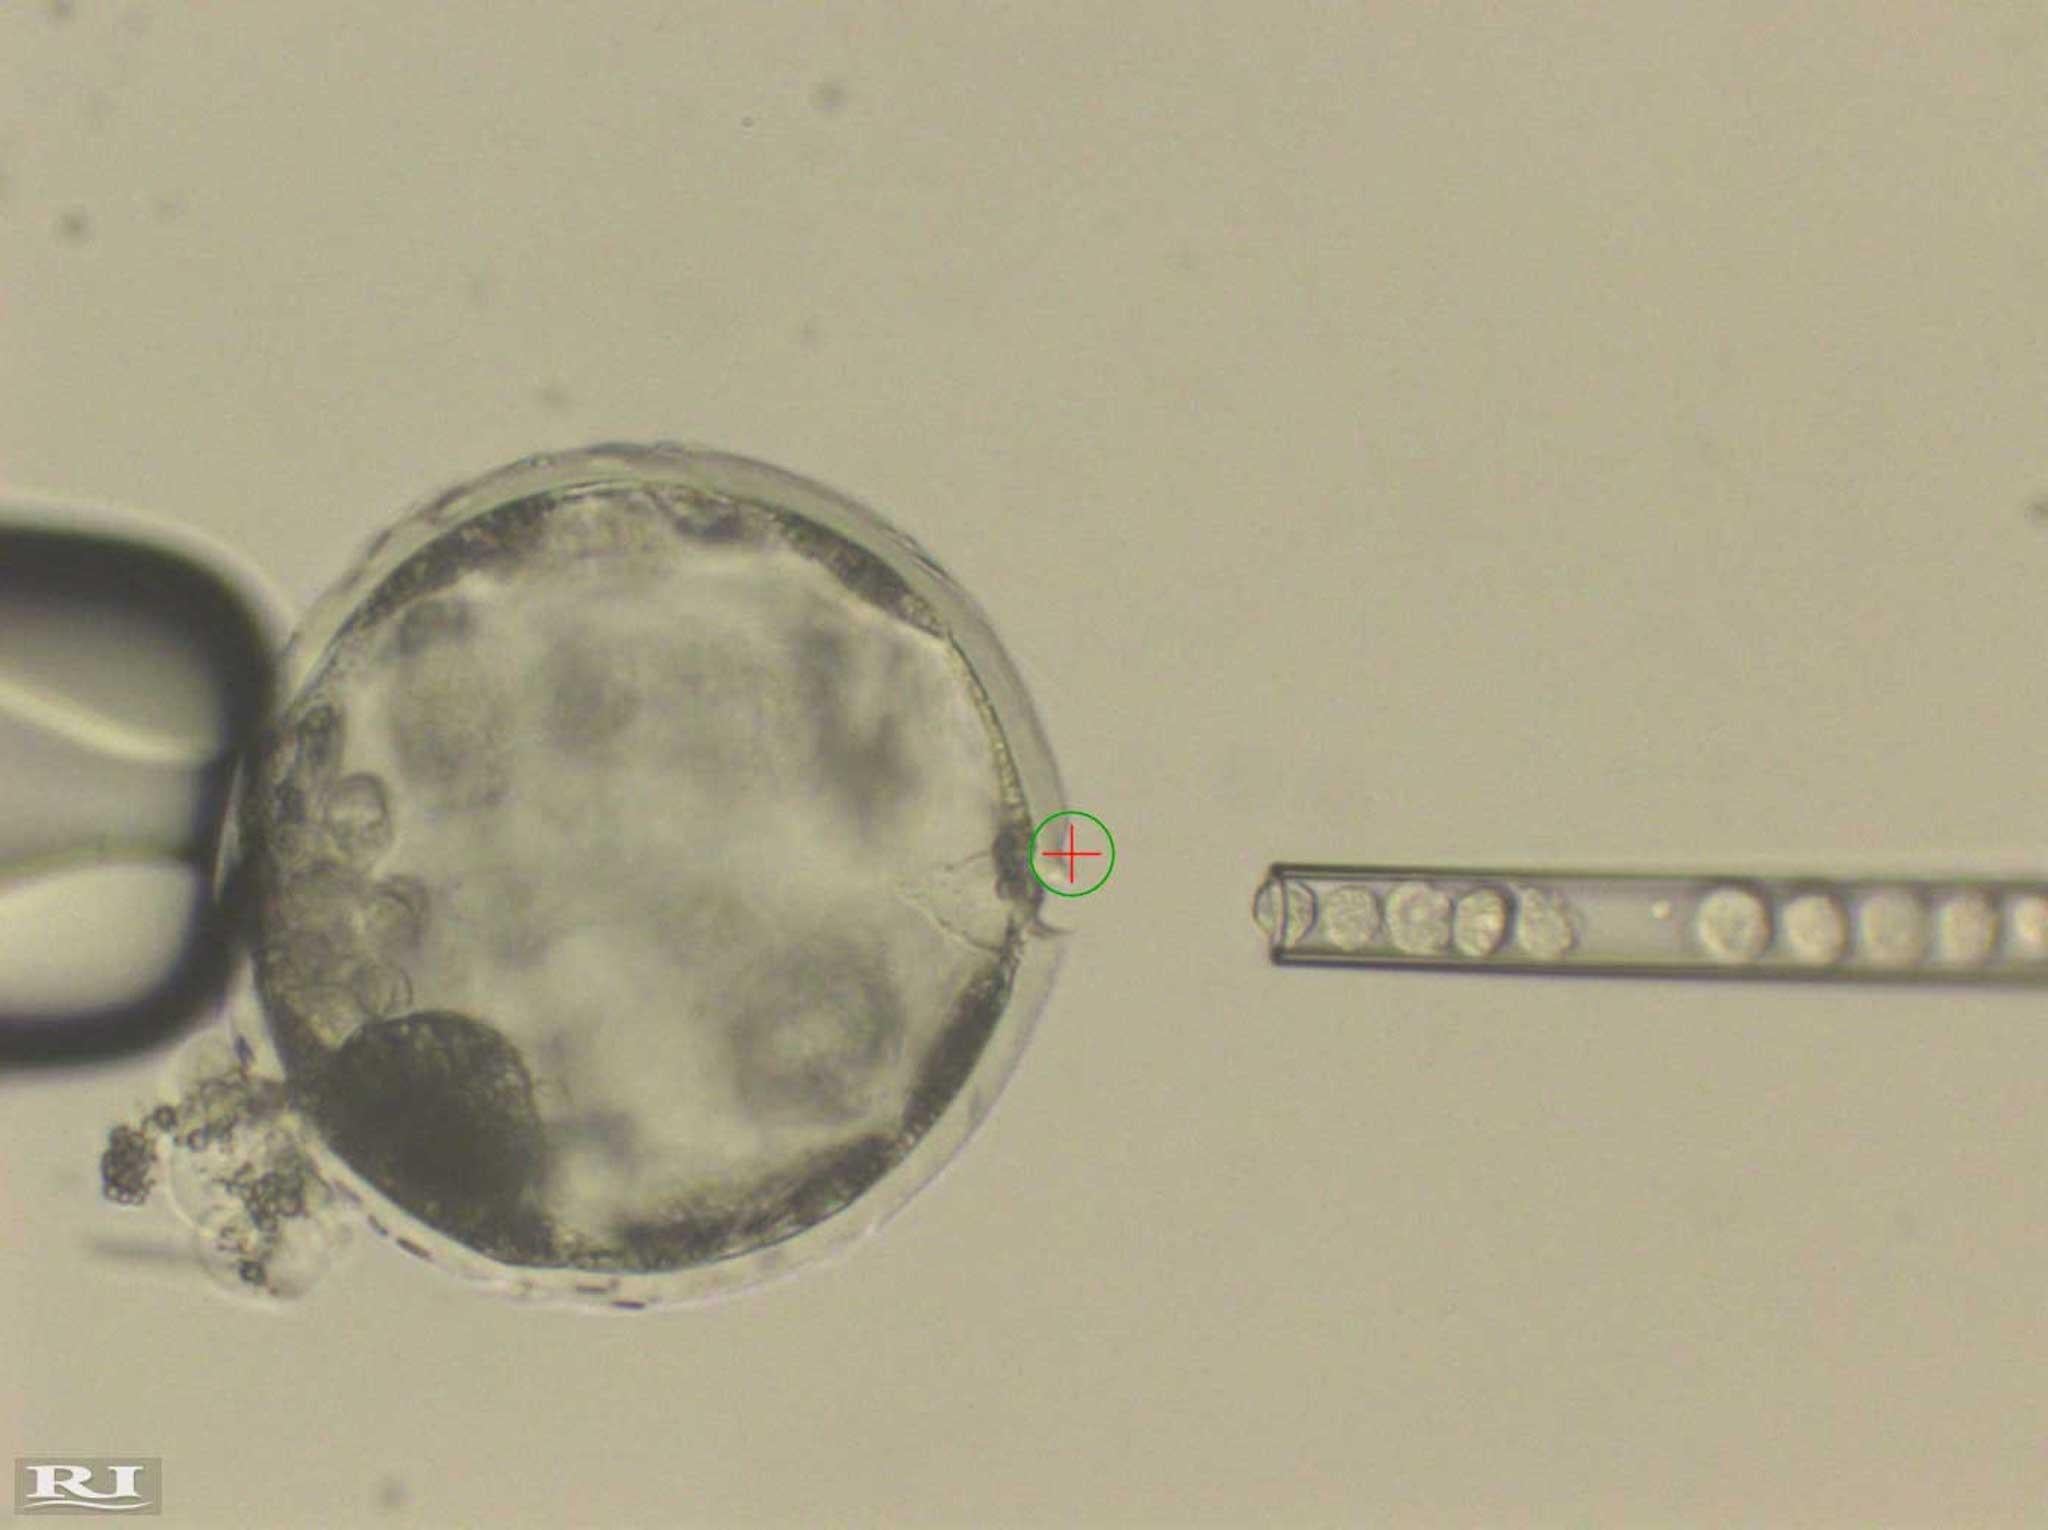 This photograph shows injection of human iPS cells into a pig blastocyst